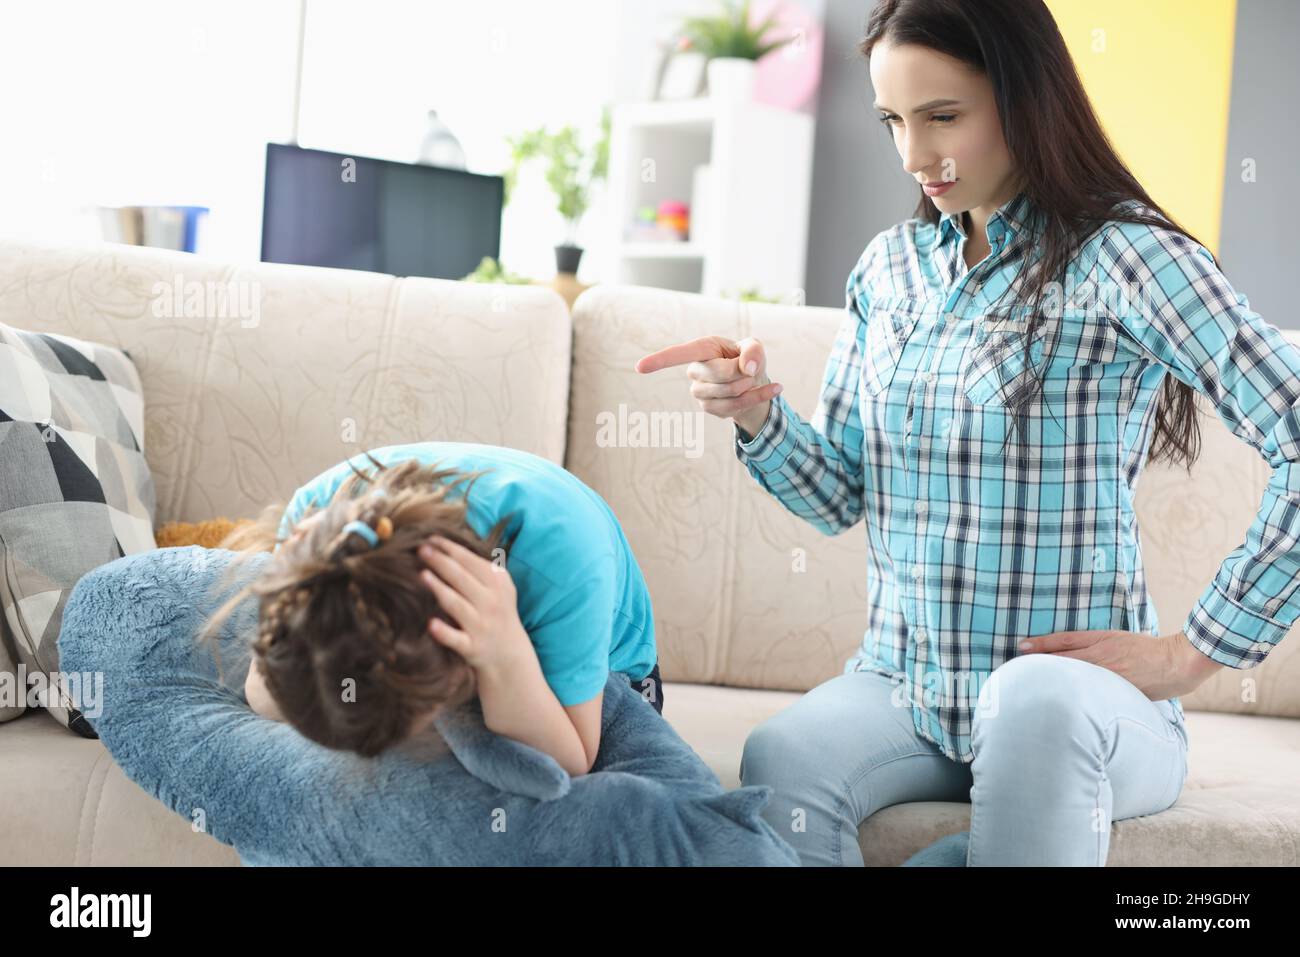 Millennial mother screaming shouting on little girl daughter Stock Photo